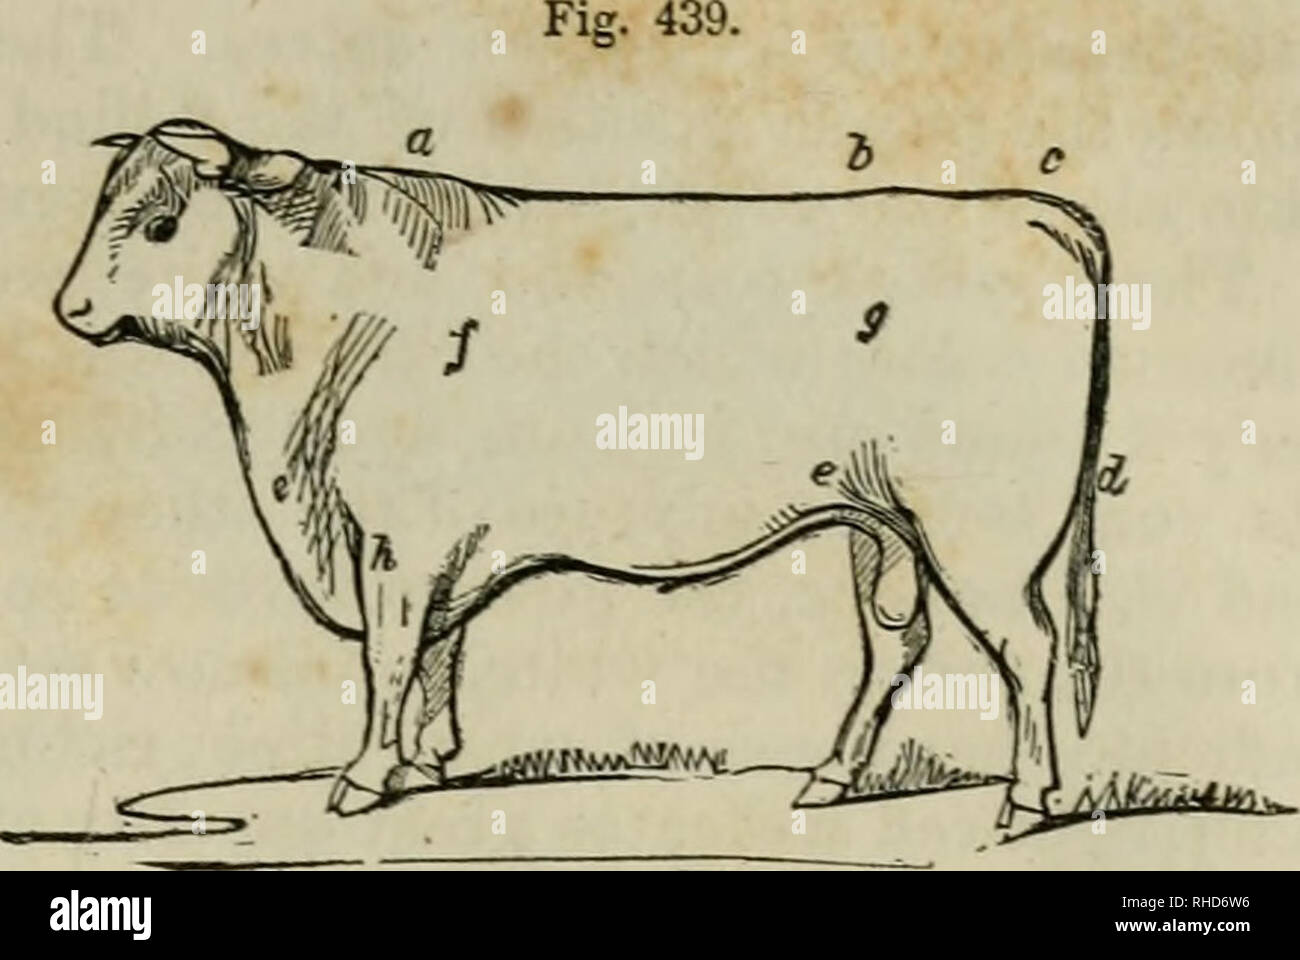 . The book of the farm : detailing the labors of the farmer, steward, plowman, hedger, cattle-man, shepherd, field-worker, and dairymaid. Agriculture. THE POINTS OF CATTLE. 443. THE SHORT-HORN BULL. shoulder-point in front oi f, past g, to the margin of the round above d. His fore-arm h was very strong; neck-vein full ; and the crest of his neck a fine and not lumpy, as is too often the case in bulls ; his hooks and back were remai'kably straight and broad, measuring across the hook-bones at h 36 in- ches ; the rump between h and c was full and round, and the tail- head c was remarkably level  Stock Photo